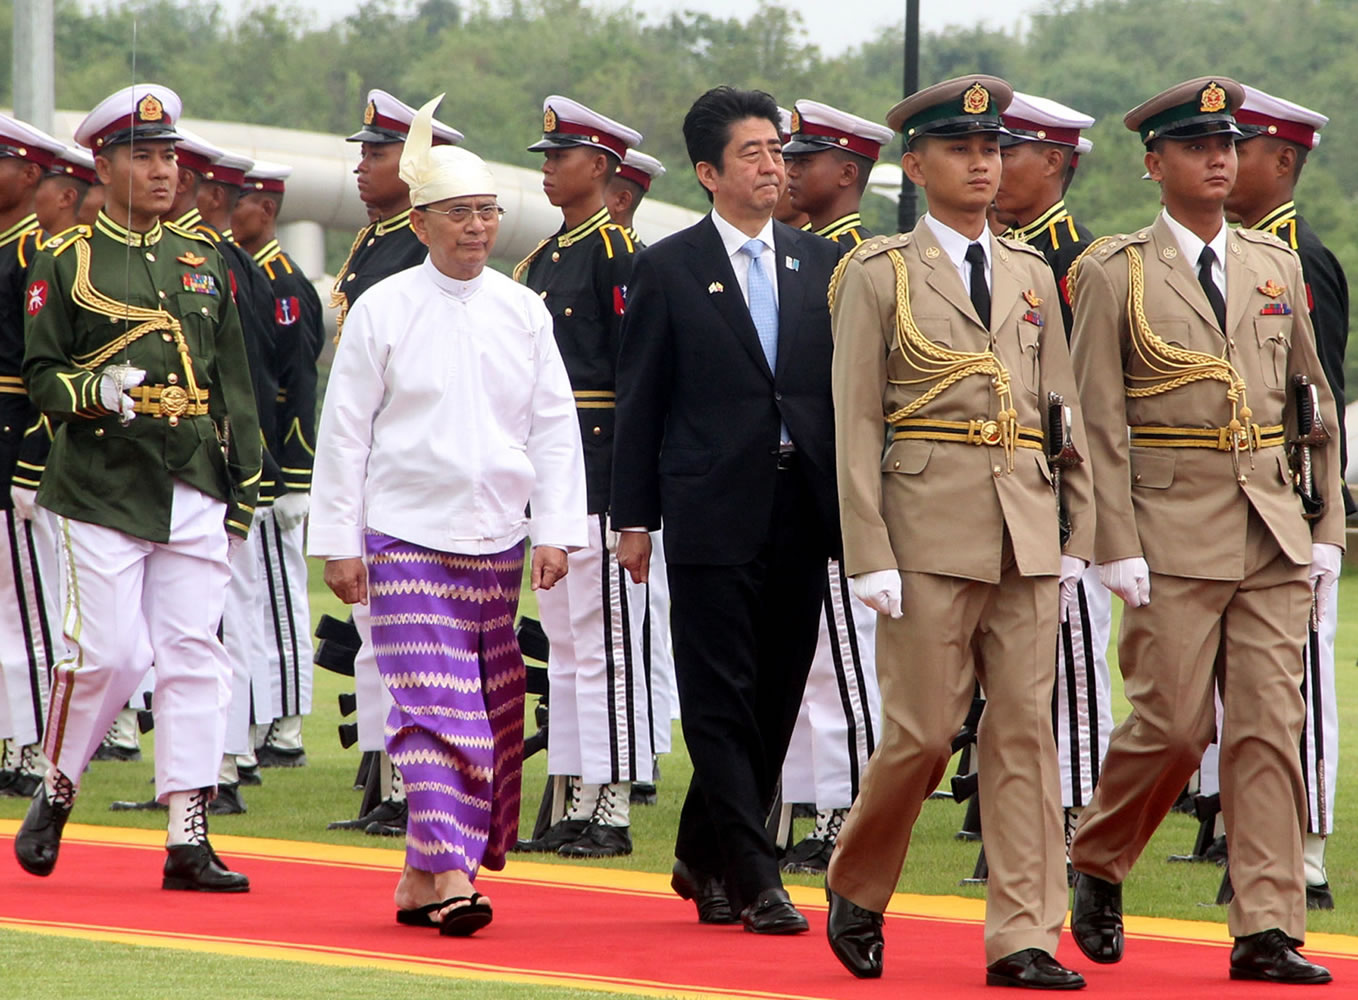 Japanese Prime Minister Shinzo Abe, center right, and Myanmar President Thein Sein, center left, inspect the honor guard at Presidential Palace on Sunday in Naypyitaw, Myanmar.